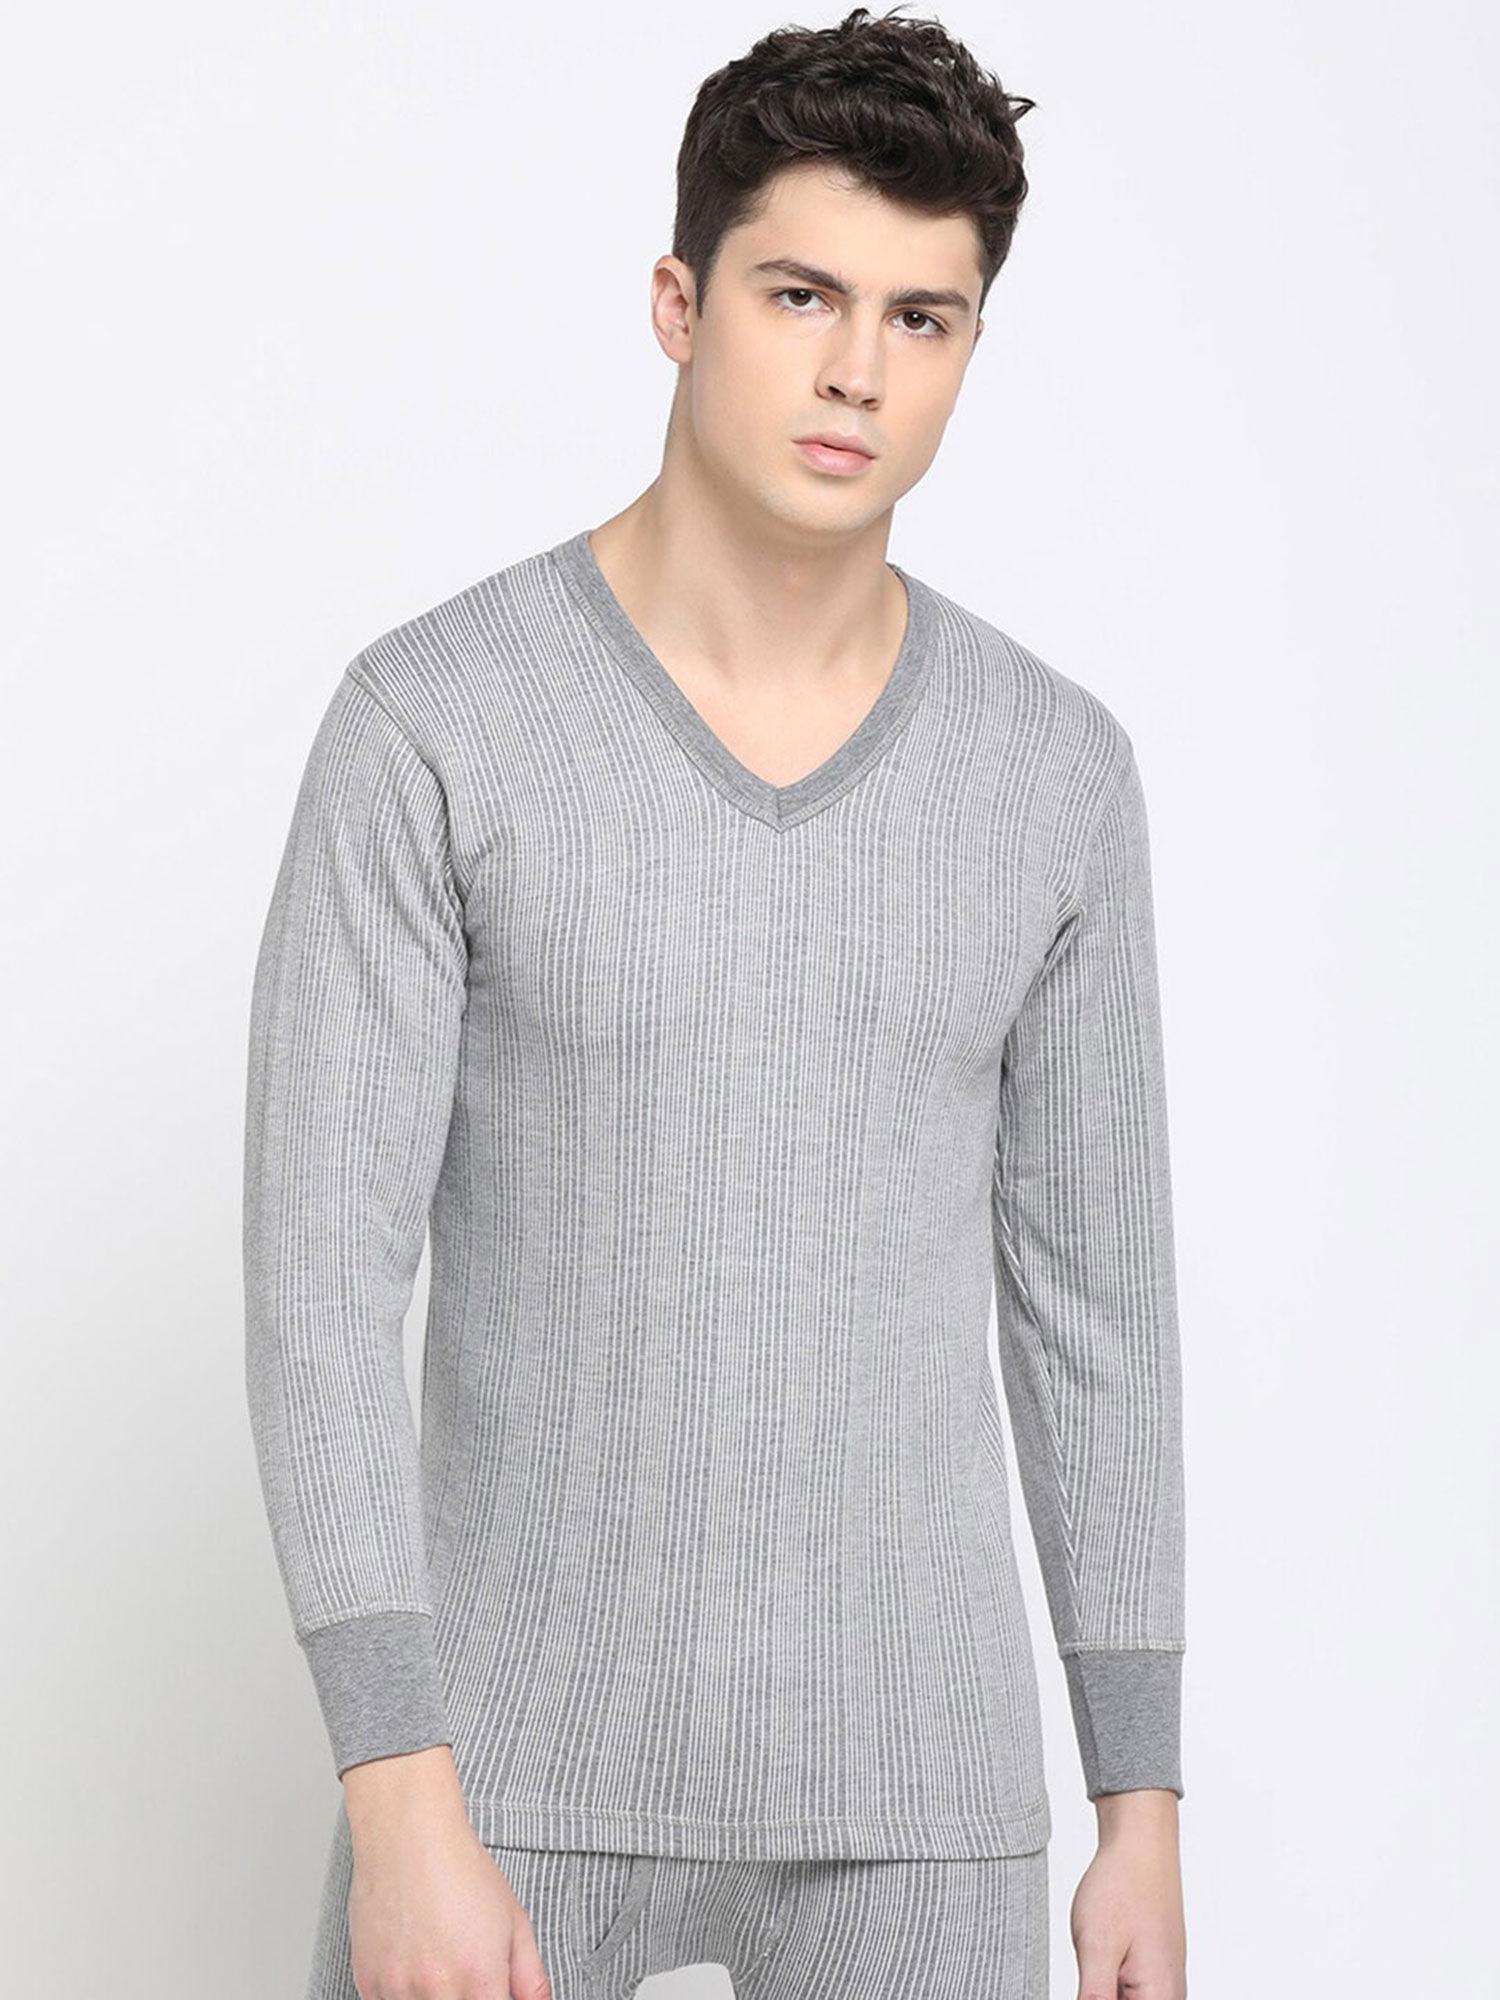 mens thermal-extra warm with heat wrap tech v-neck long sleeves t-shirt grey